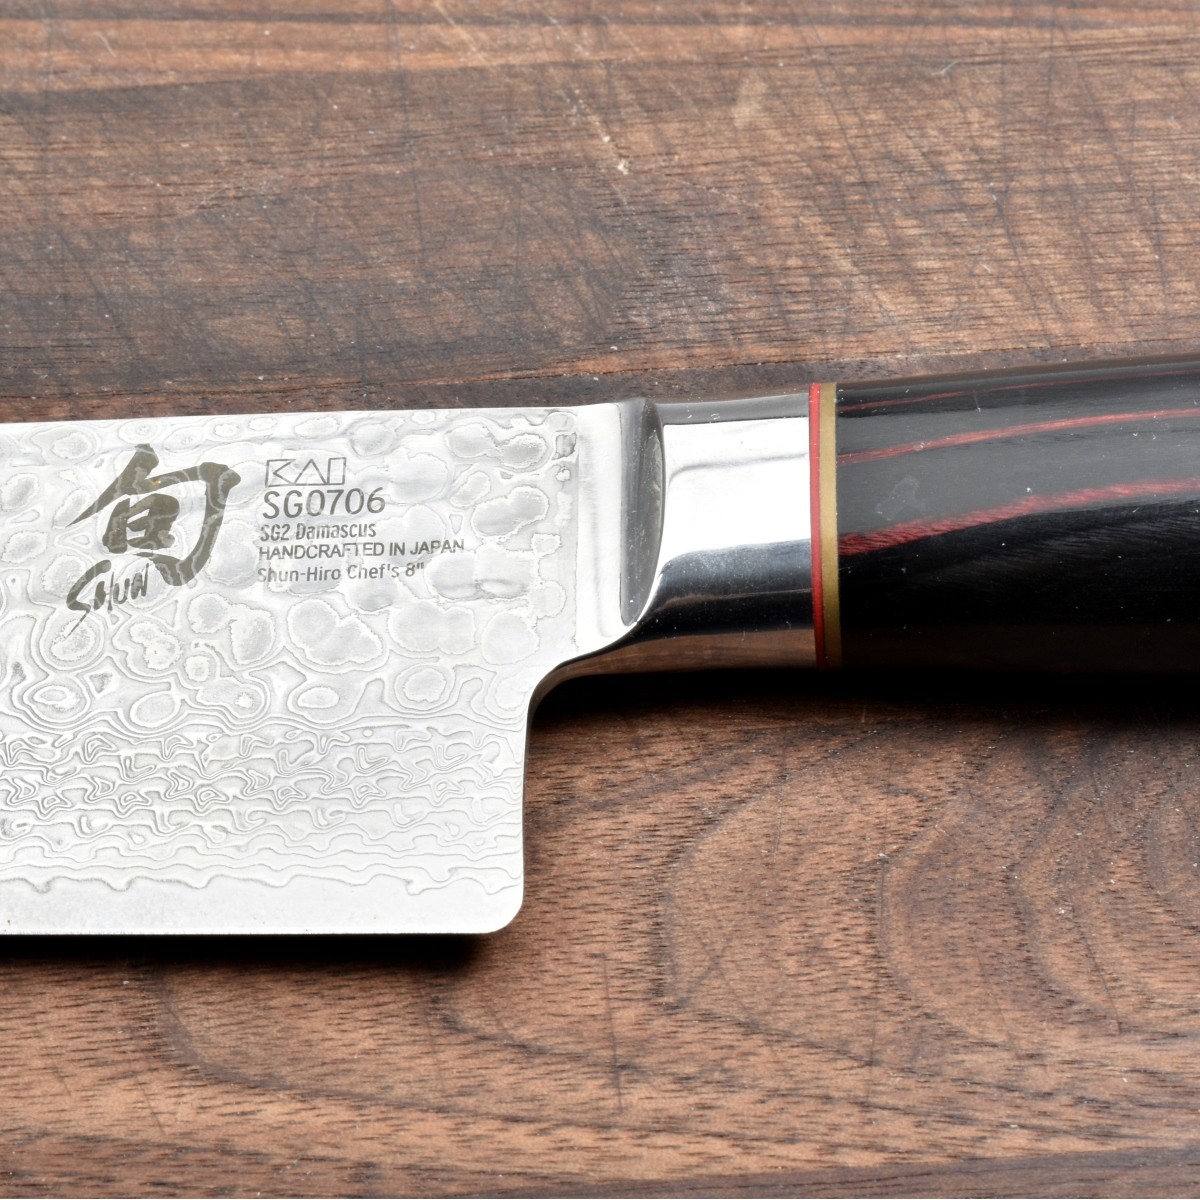 Two Japanese Chef's Knives